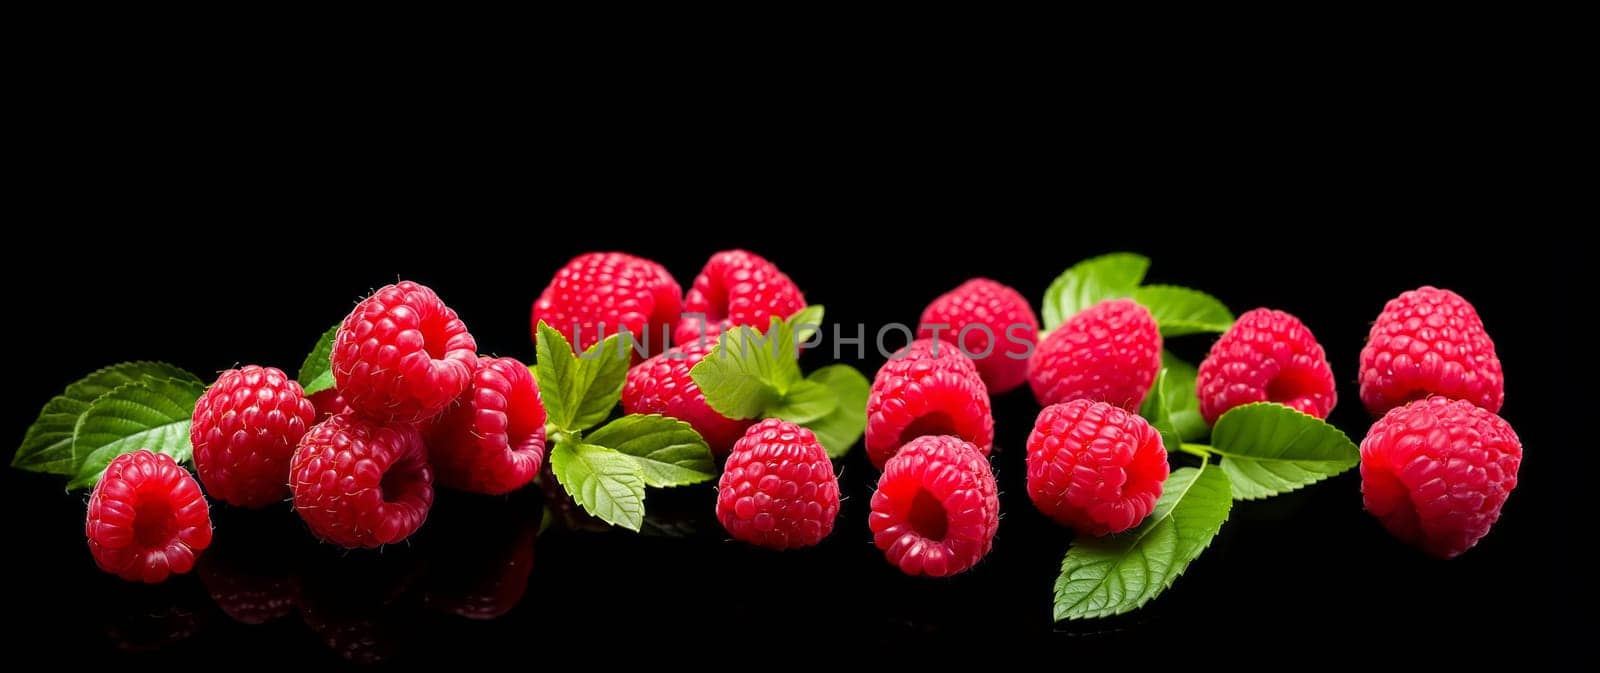 Raspberries with leaves isolated on black background background by NataliPopova